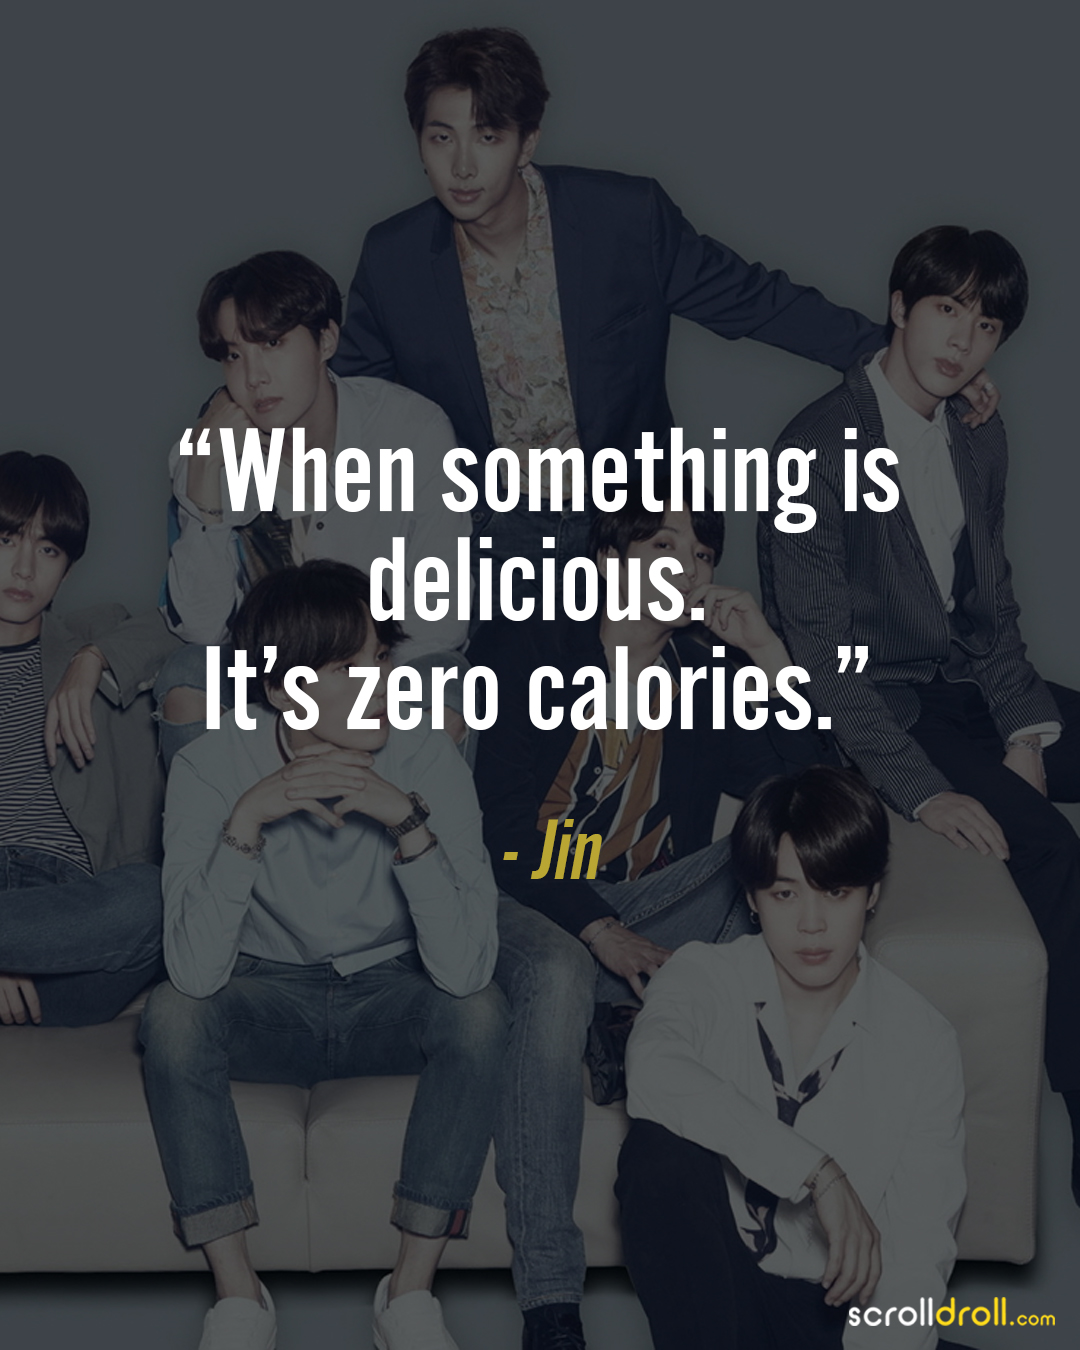 6 Quotes About Jungkook